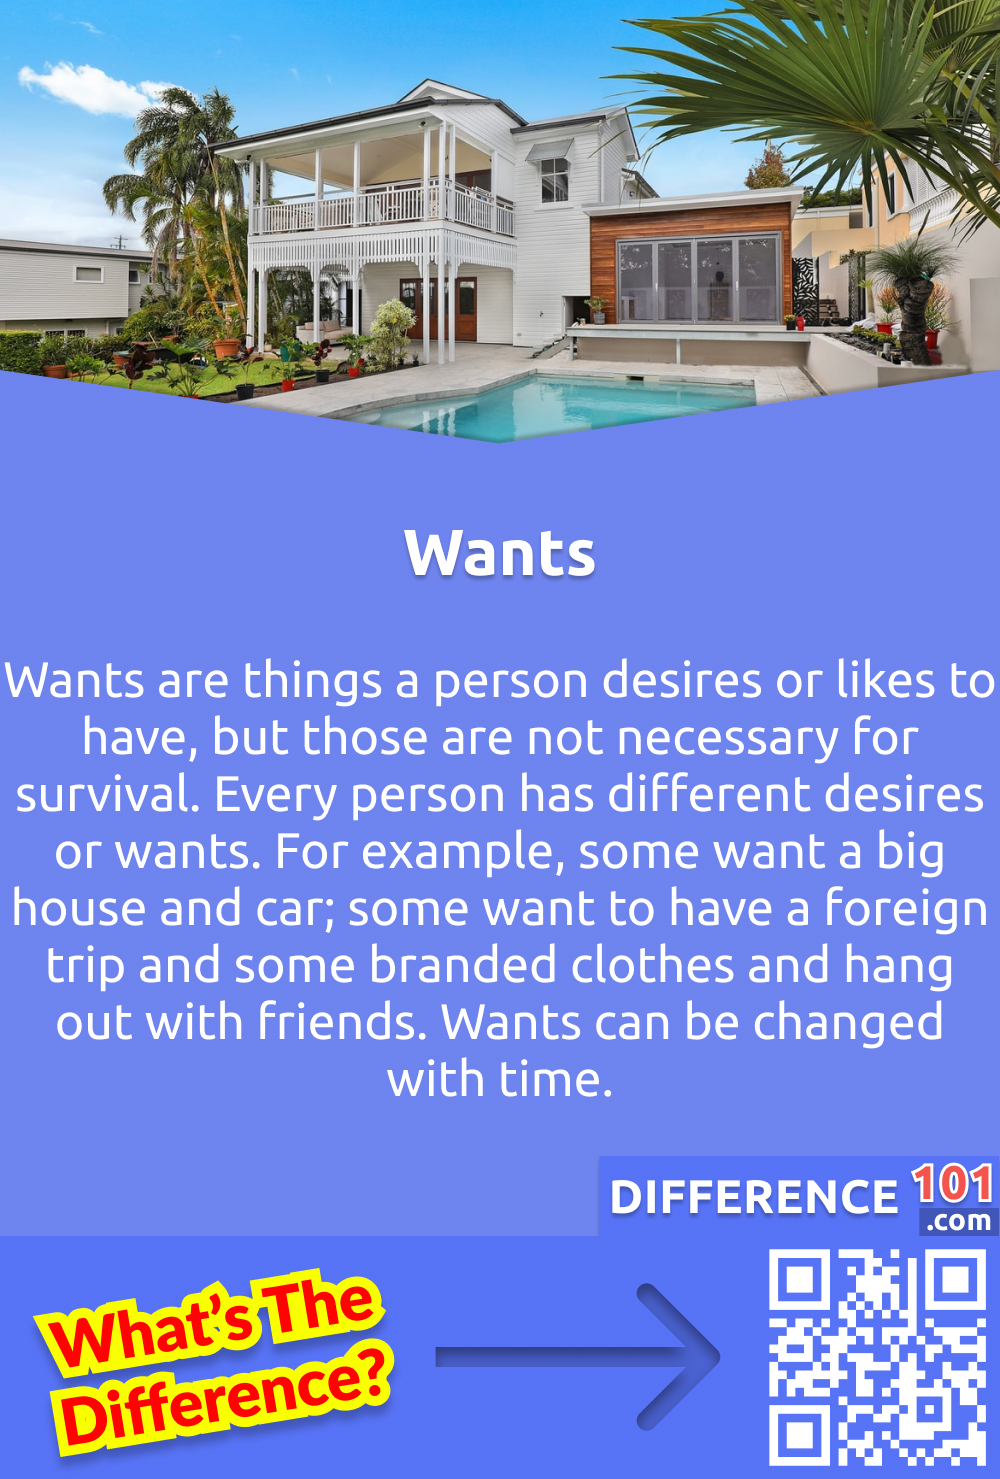 What Are Wants? Wants are things a person desires or likes to have, but those are not necessary for survival. Every person has different desires or wants. For example, some want a big house and car; some want to have a foreign trip and some branded clothes and hang out with friends. Wants can be changed with time.